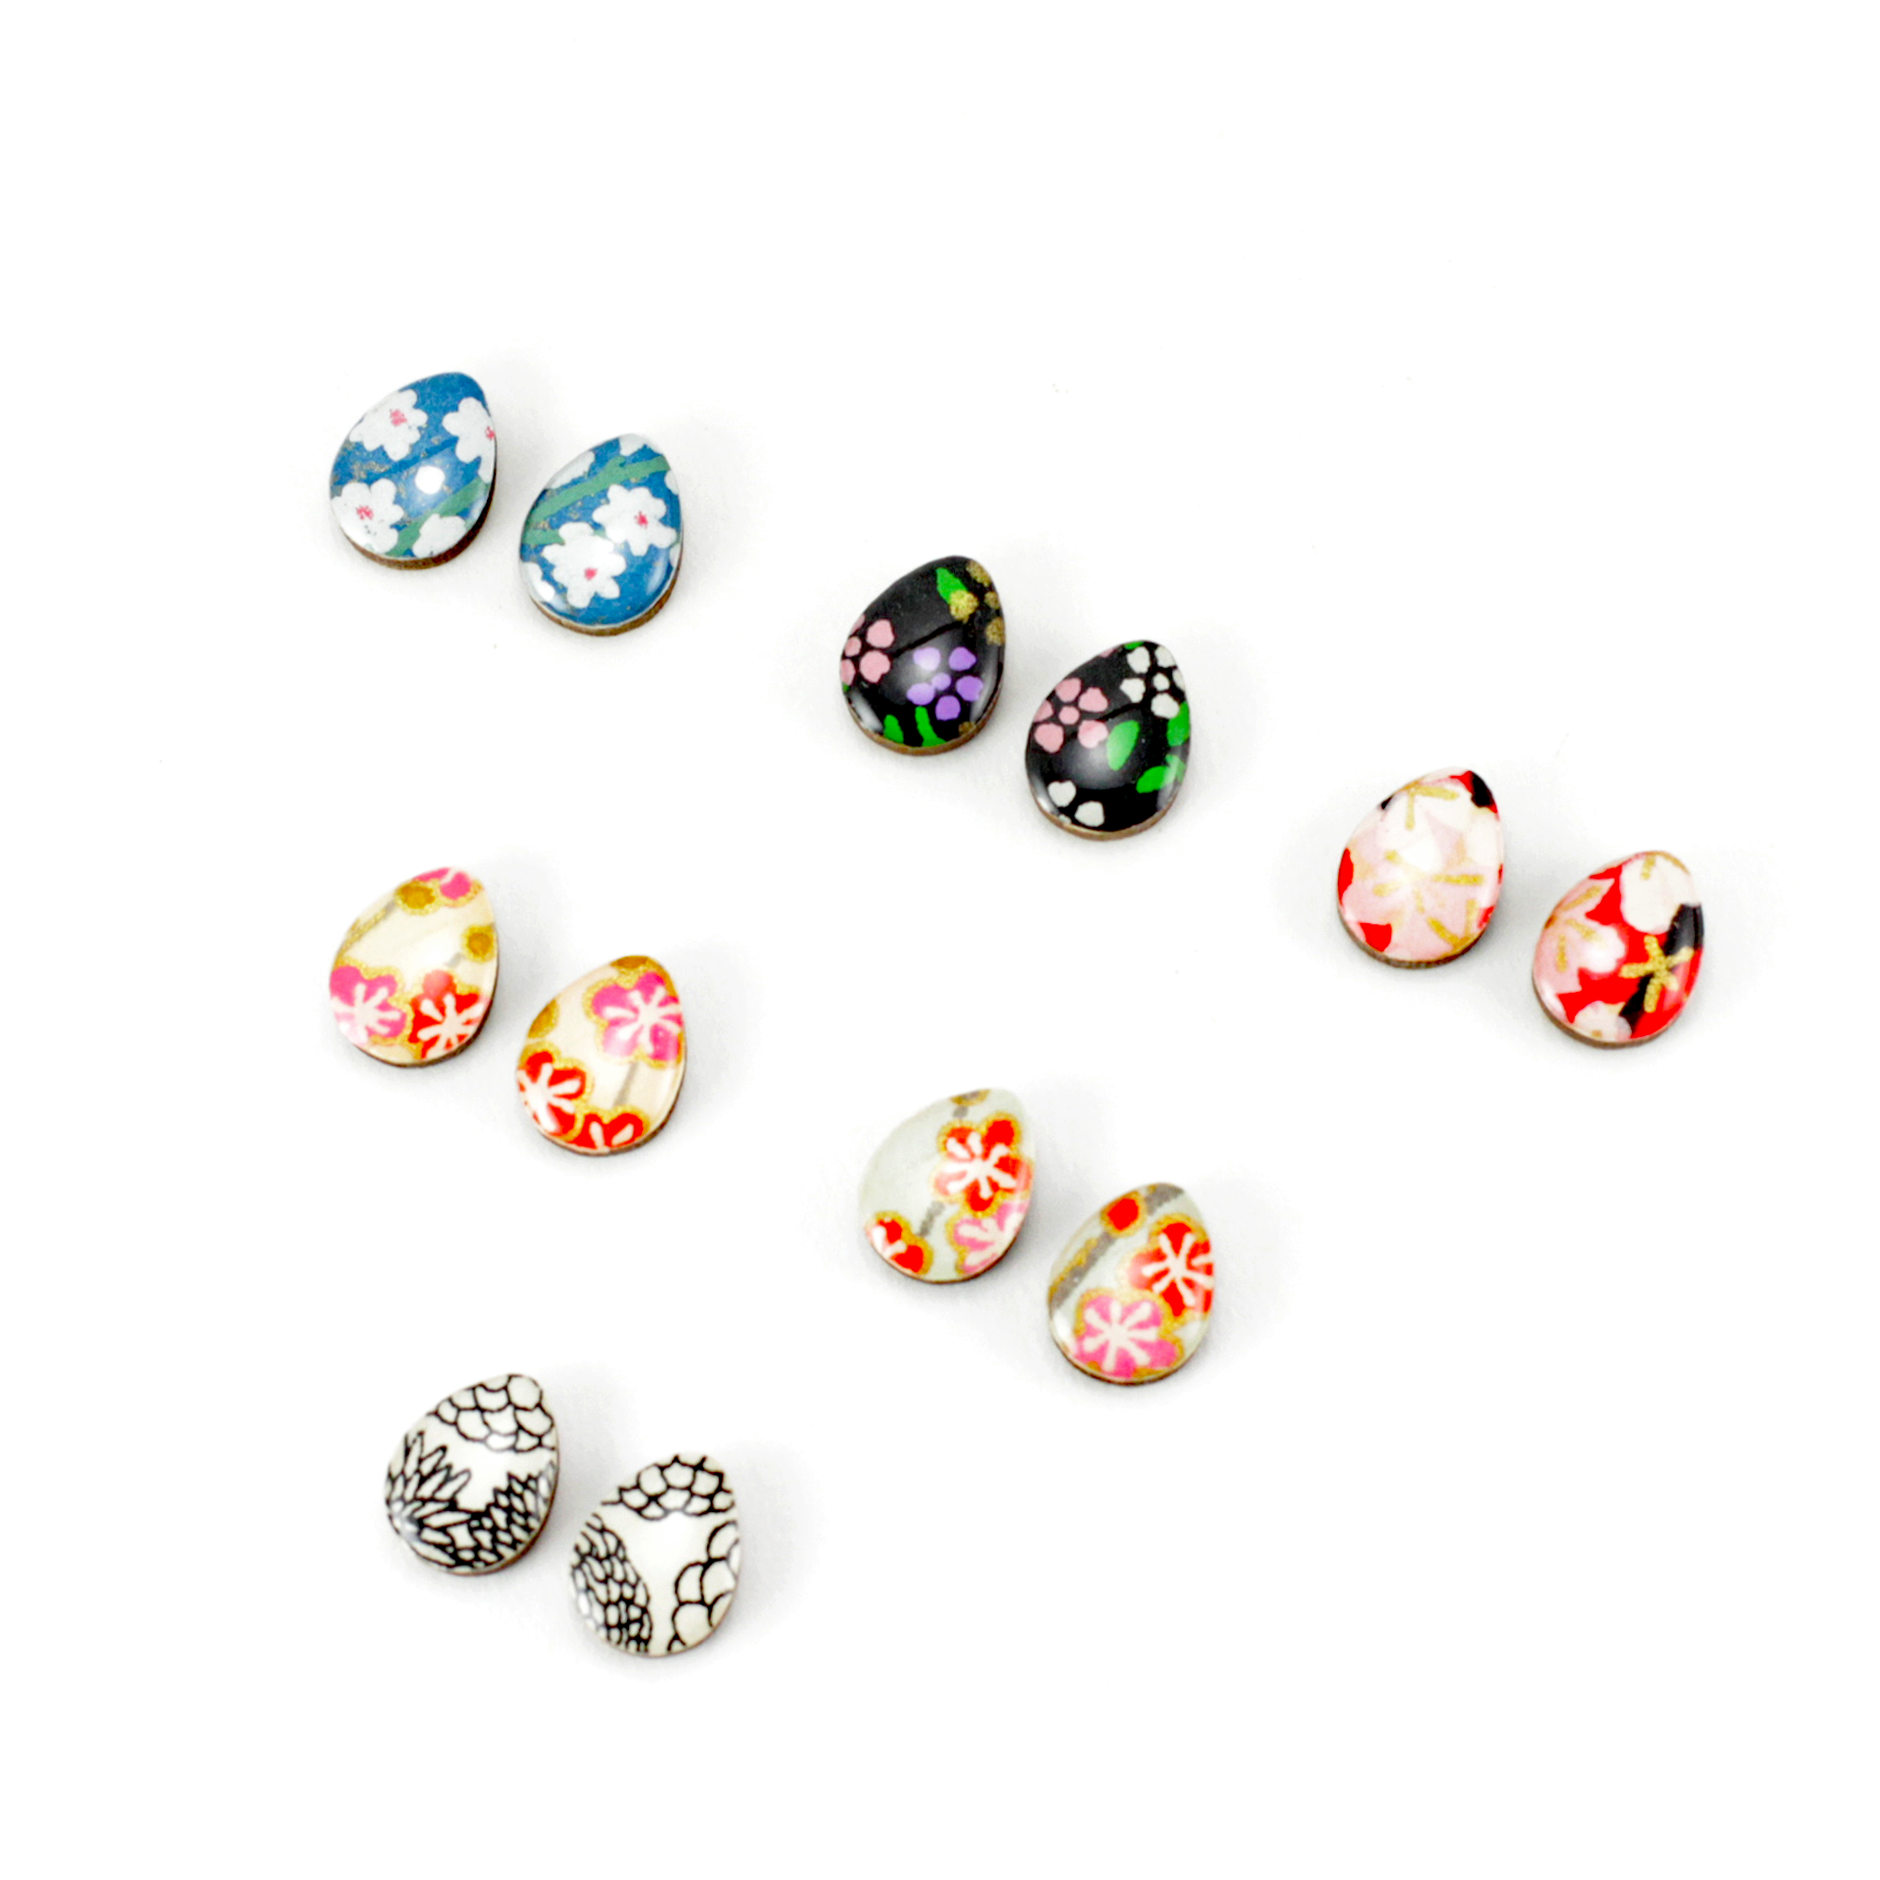 Oval/Egg Shaped Titanium Stud Earrings: Floral Chiyogami